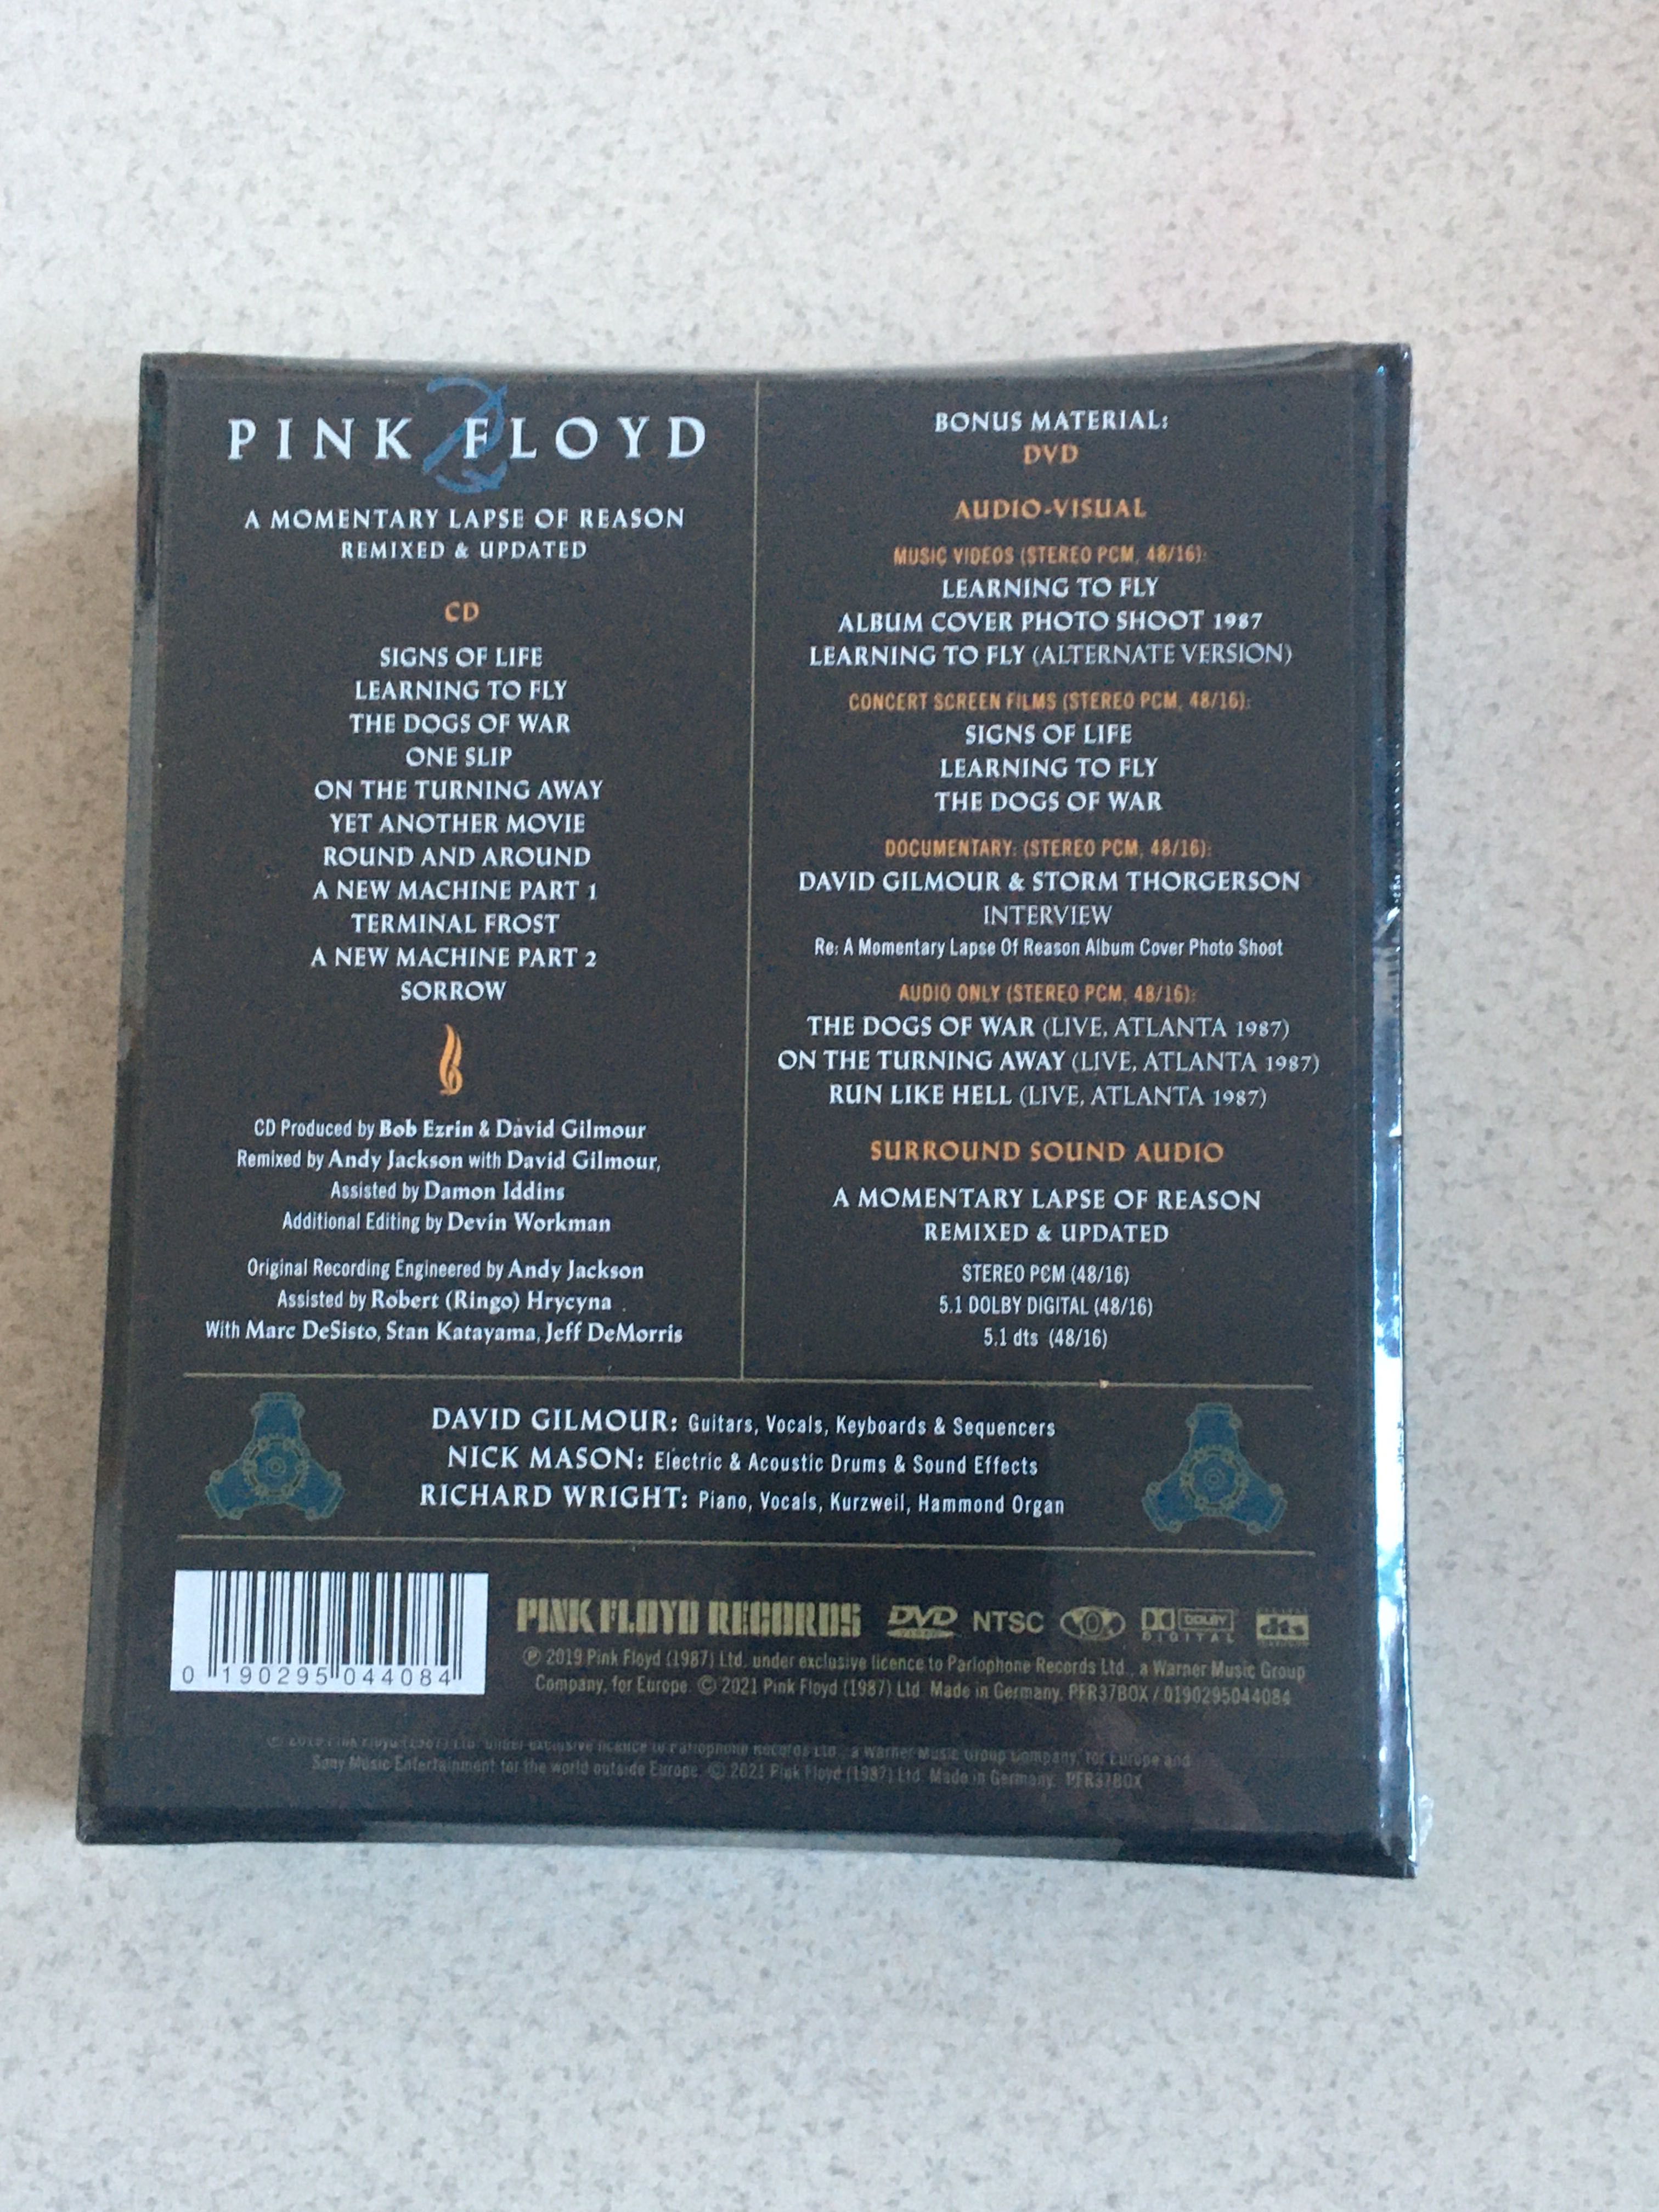 Pink Floyd A Momentary Lapse Of Reason CD/DVD deluxe